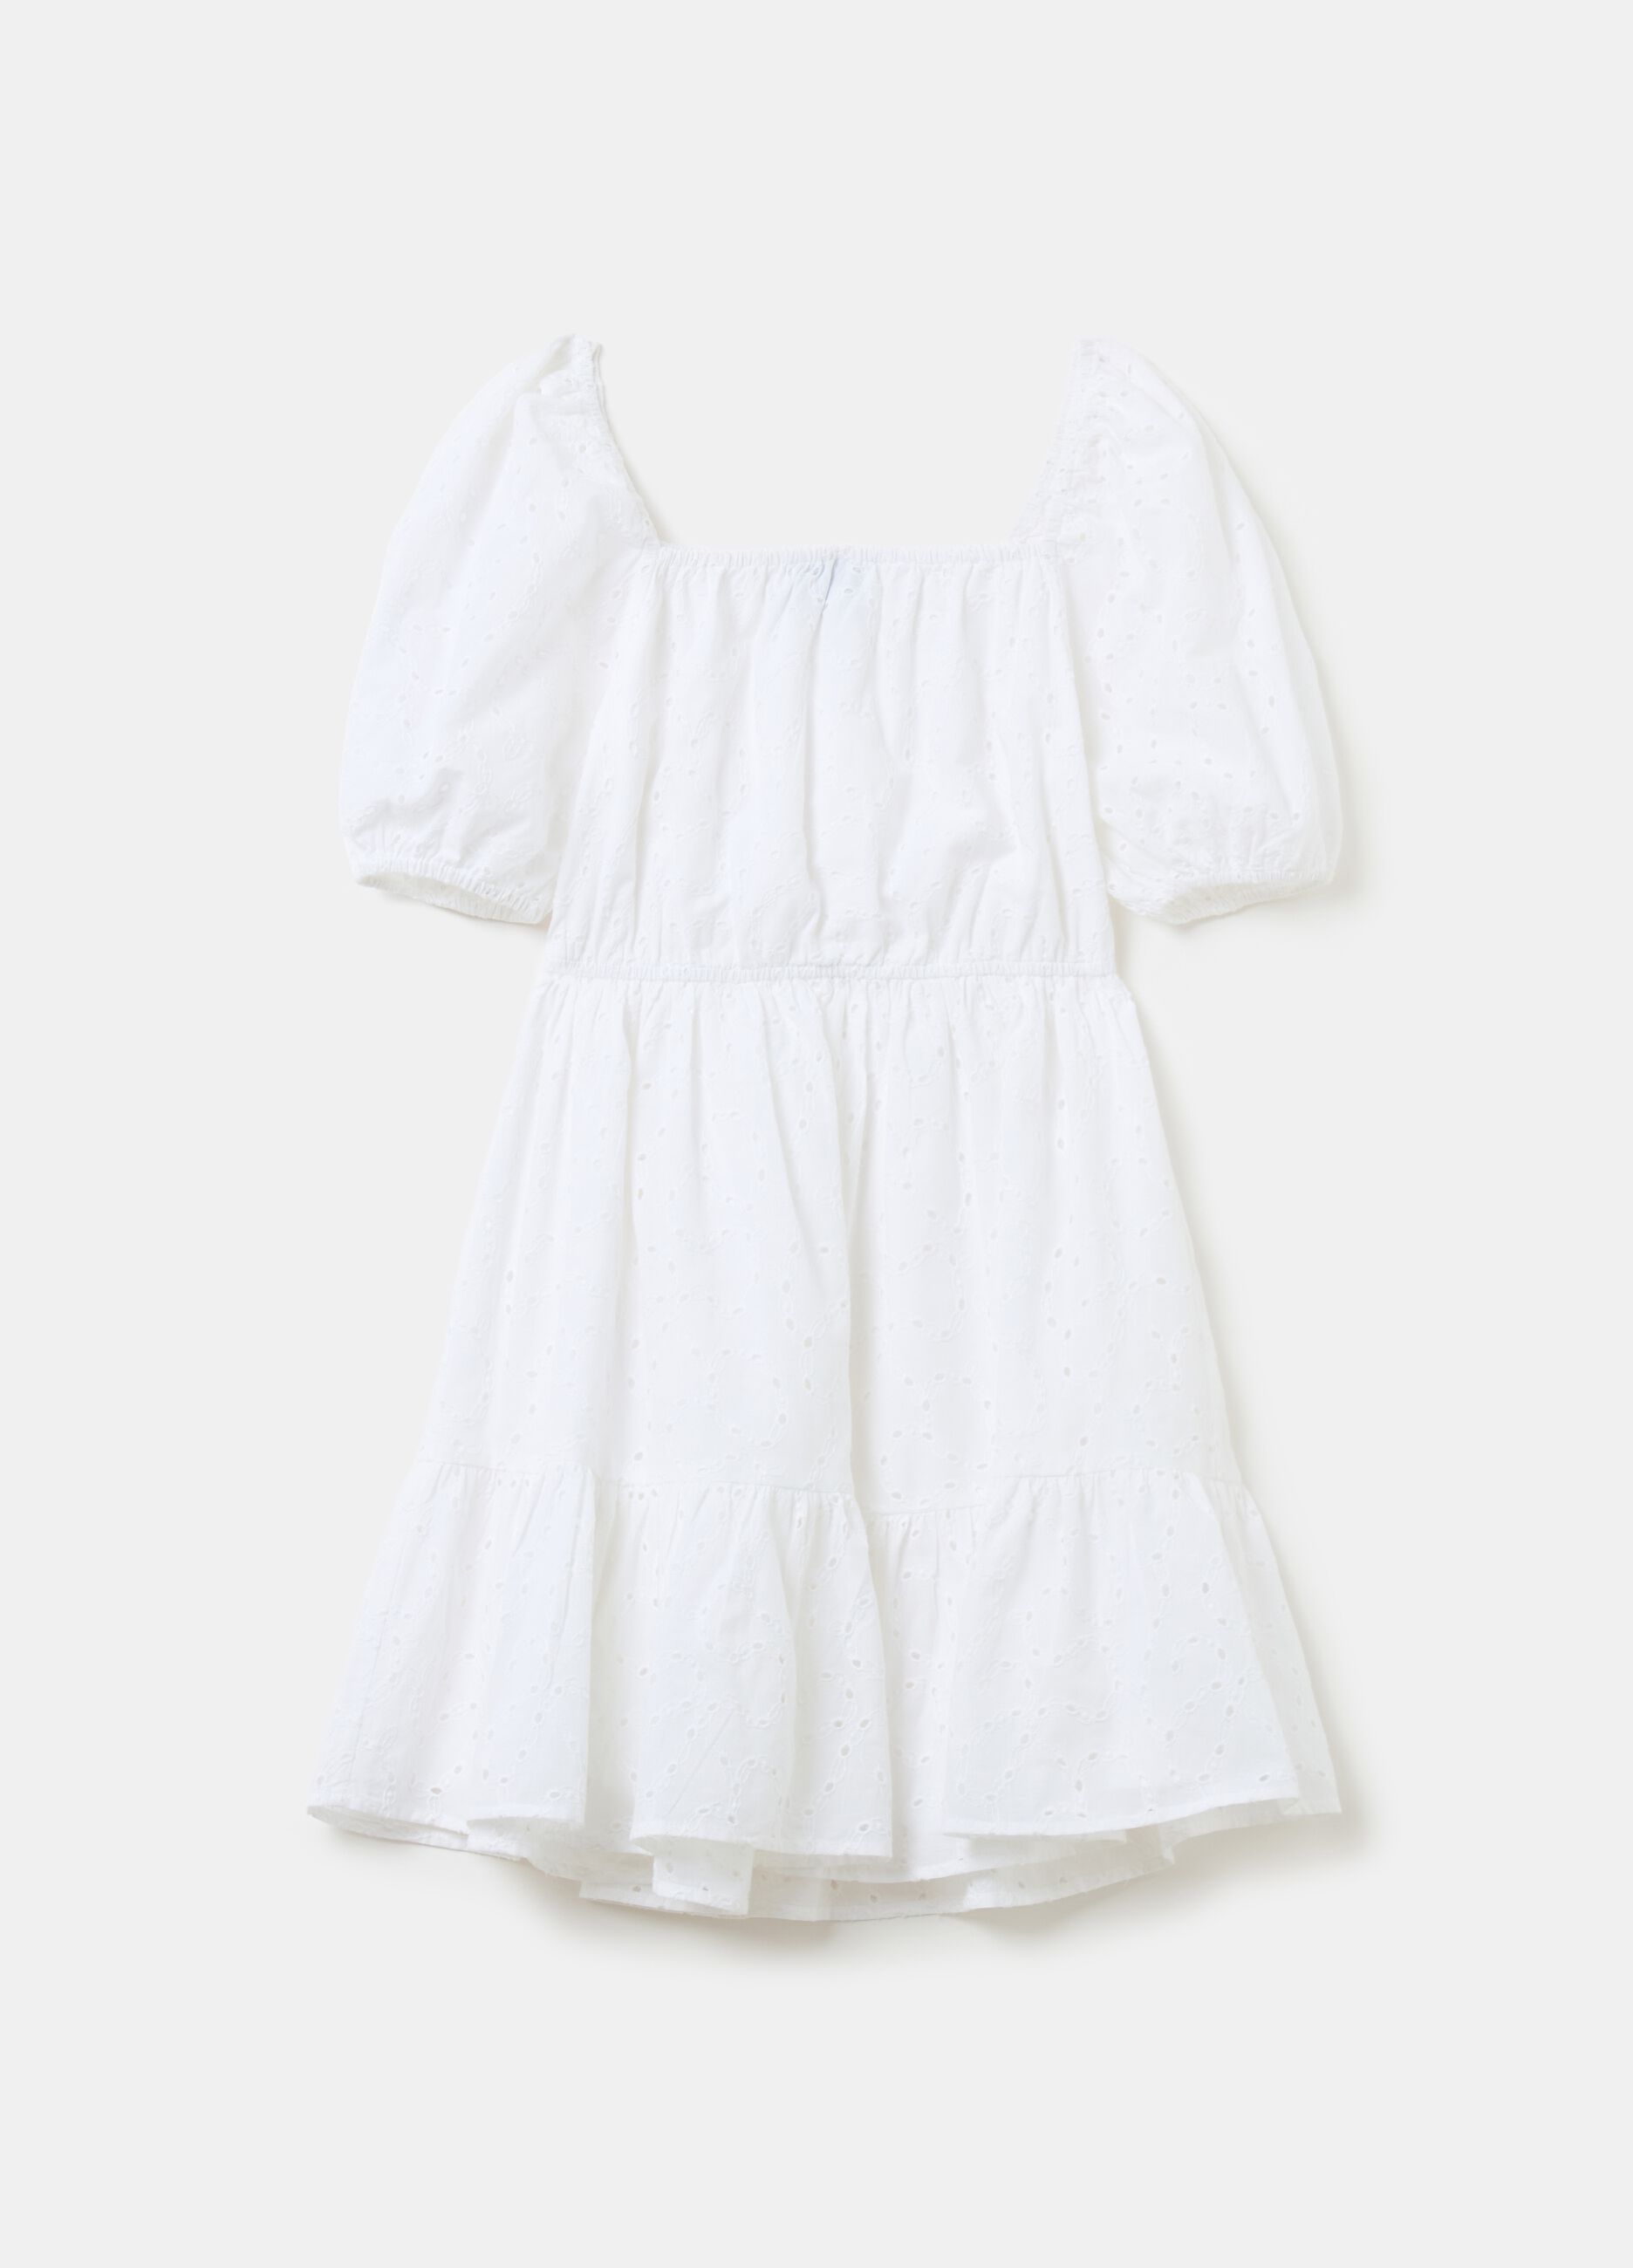 Tiered dress in broderie anglaise cotton